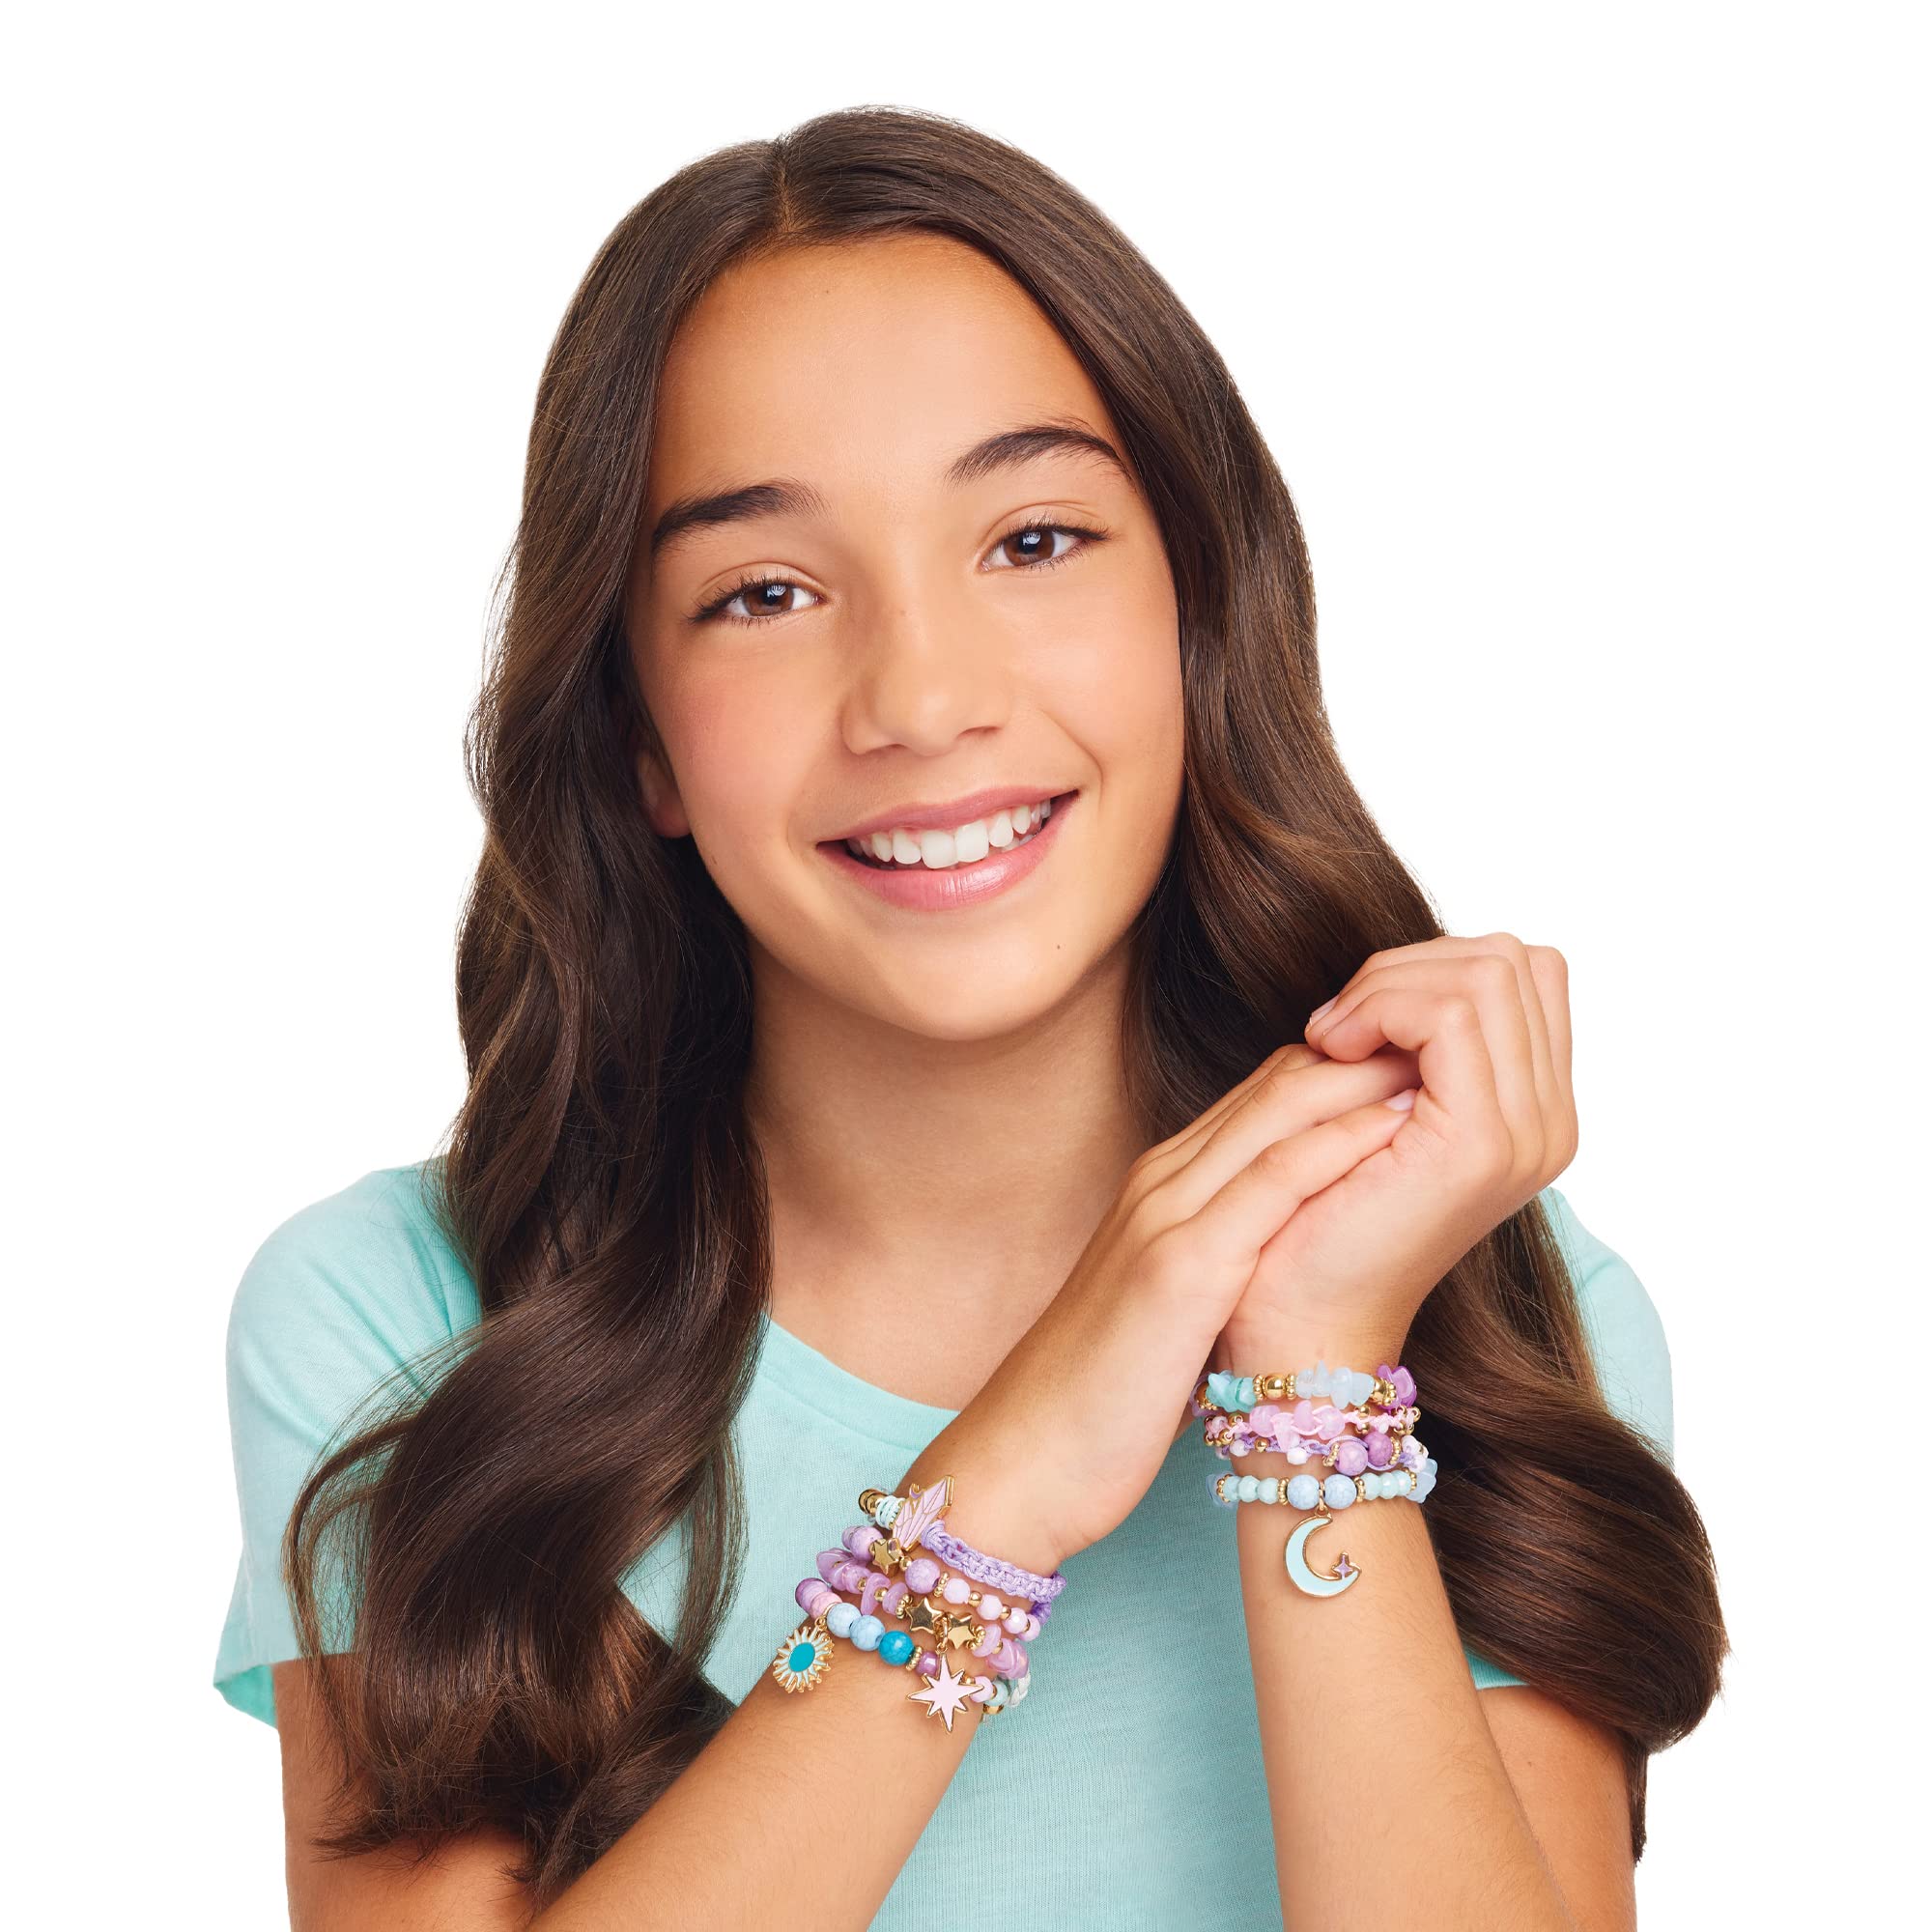 Make It Real: Celestial Stones Bracelets Kit - Create 8 Fashionable Bracelets, 4 Celestial Charms, 270 Pieces, Includes Play Tray, All-in-One, DIY Jewelry Kit, Tweens & Girls, Arts & Crafts, Ages 8+